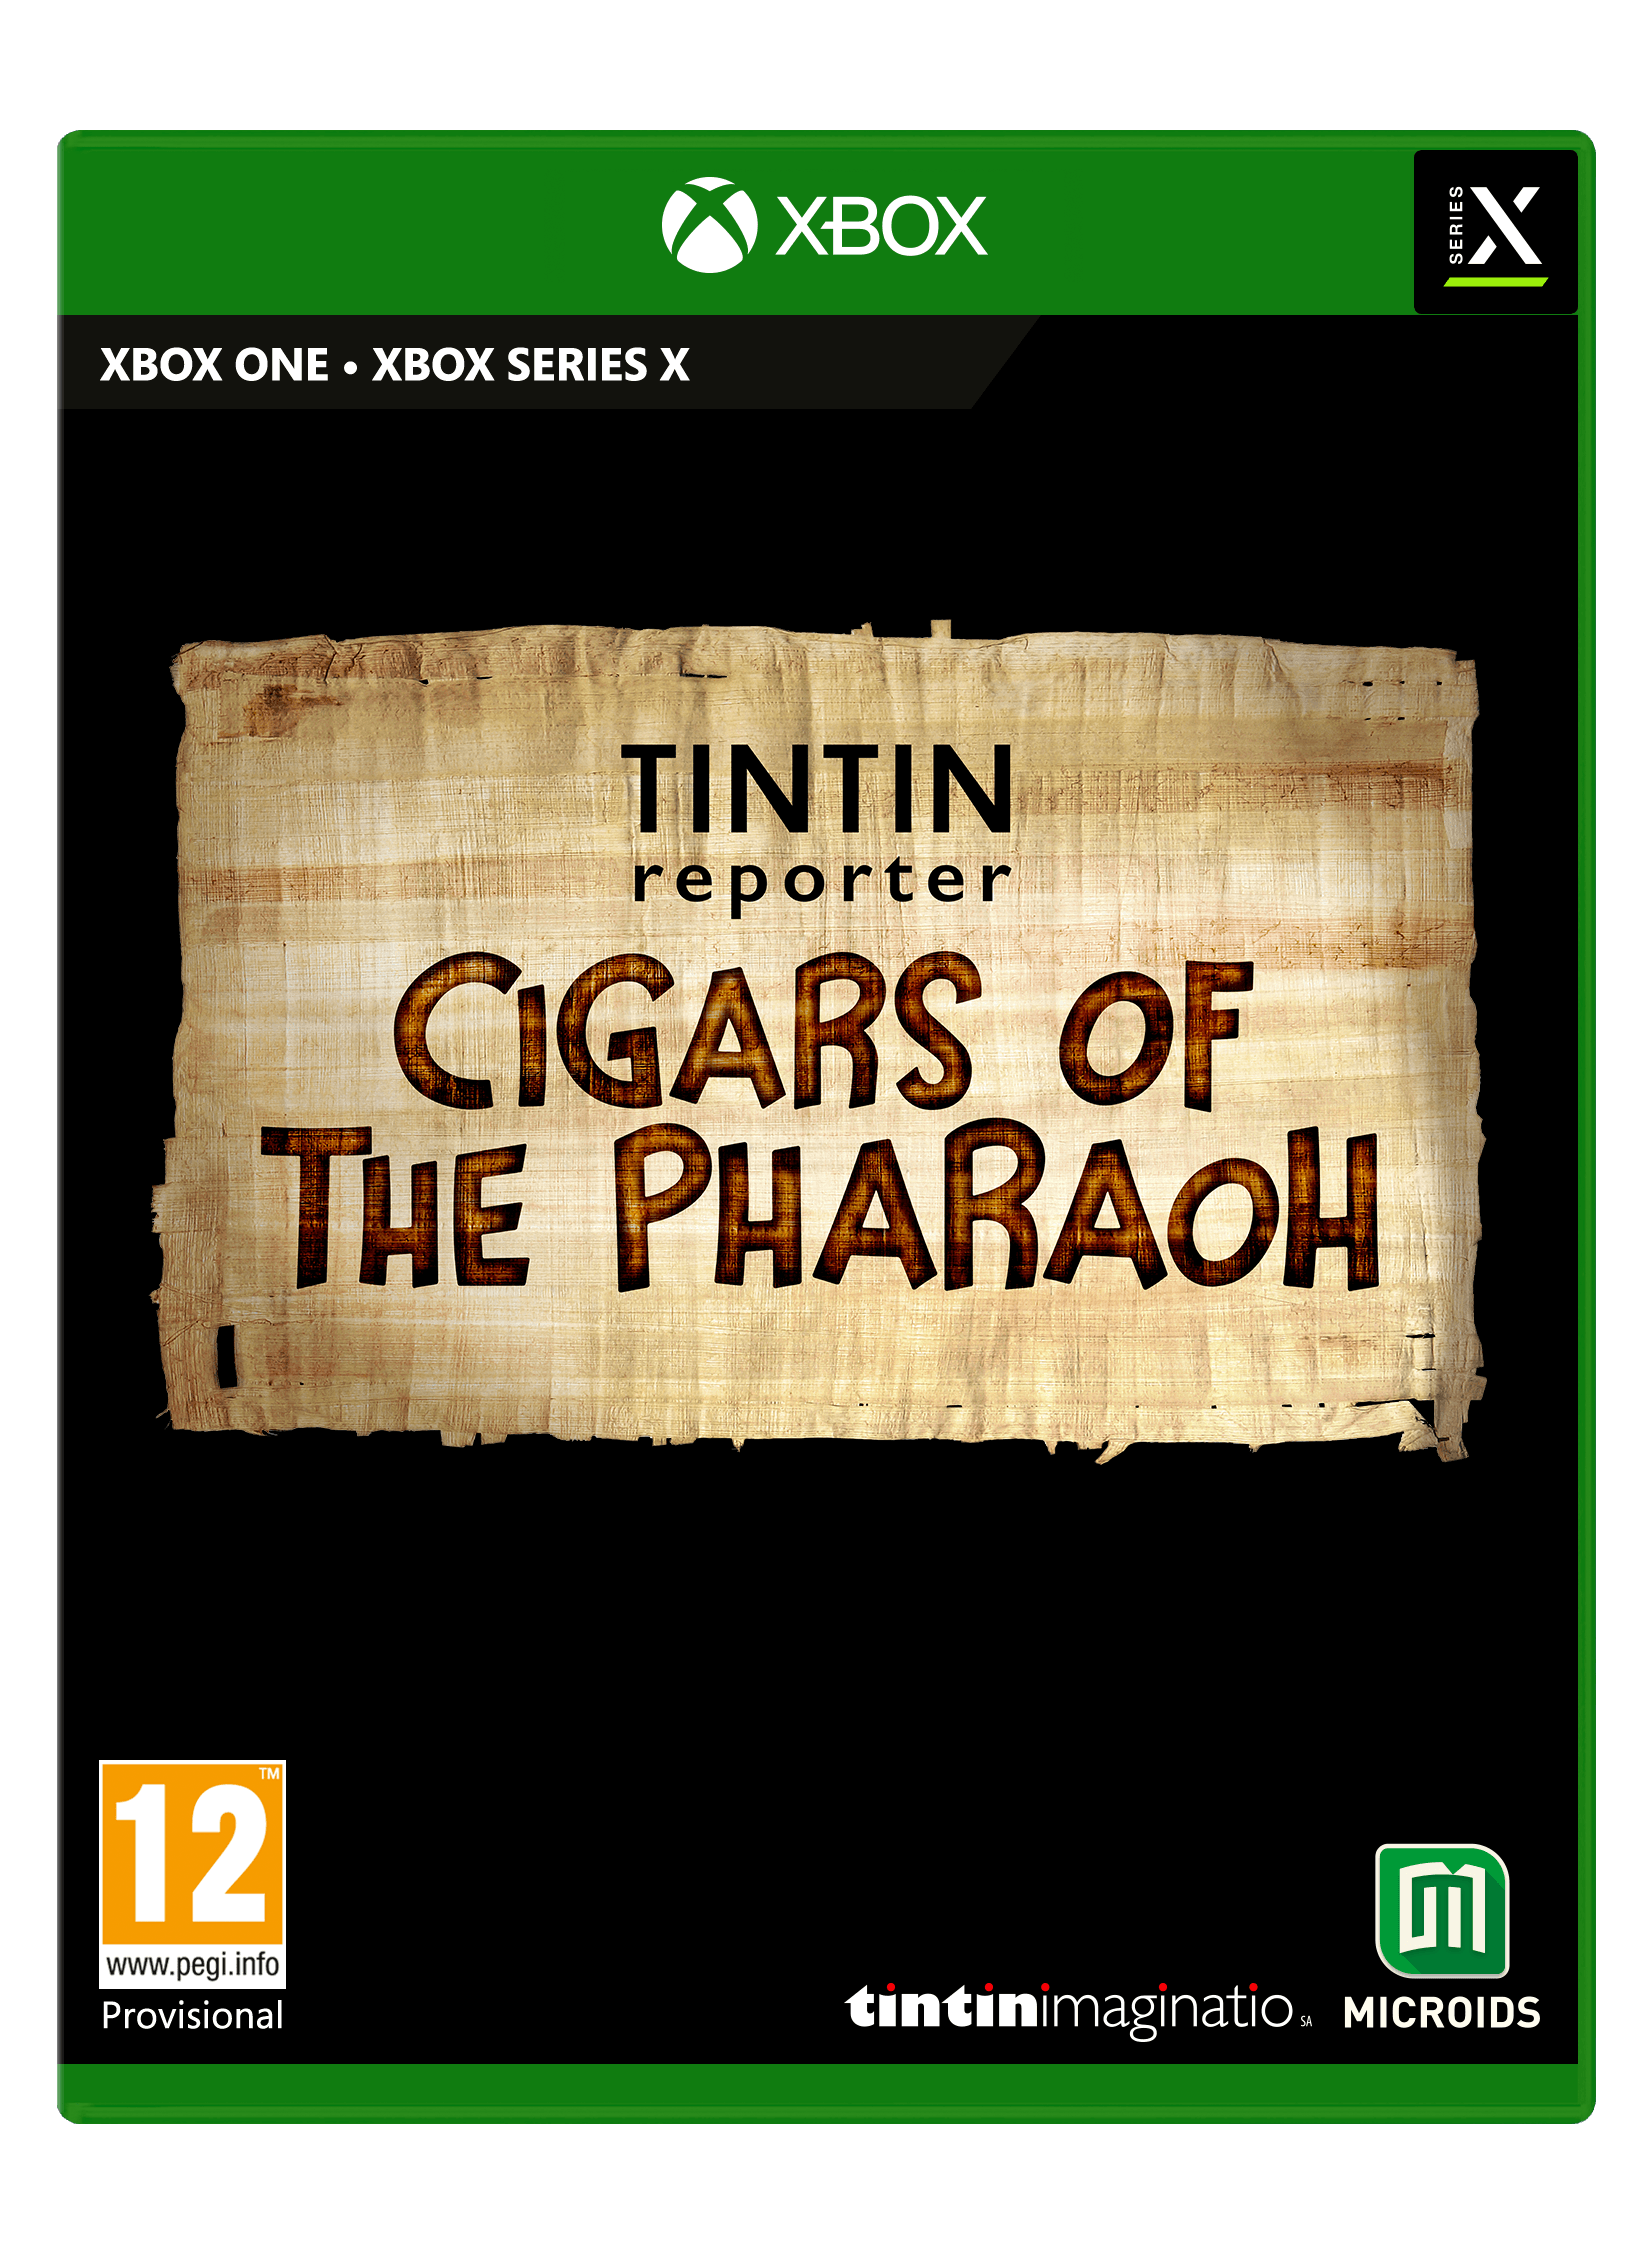 Xbox - Tintin Reporter: Cigars of the Pharaoh - Limited Edition - Want a New Gadget